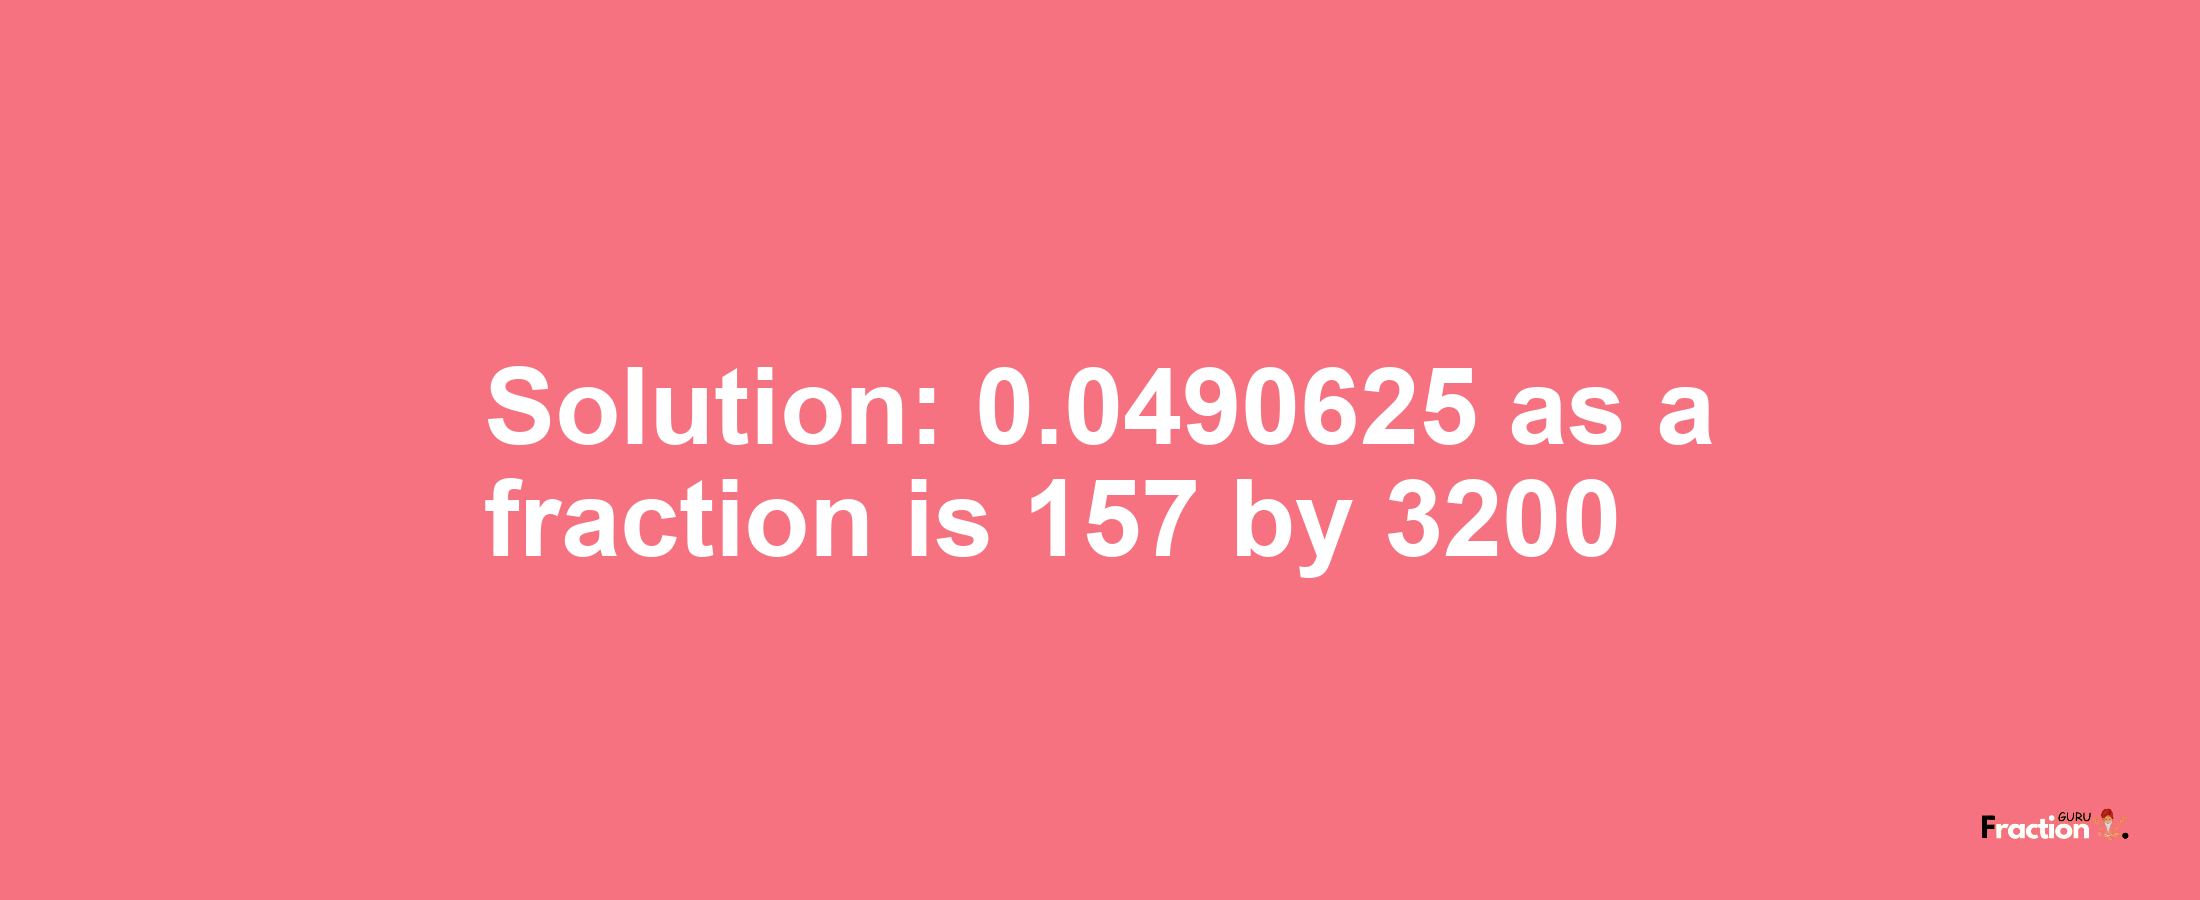 Solution:0.0490625 as a fraction is 157/3200